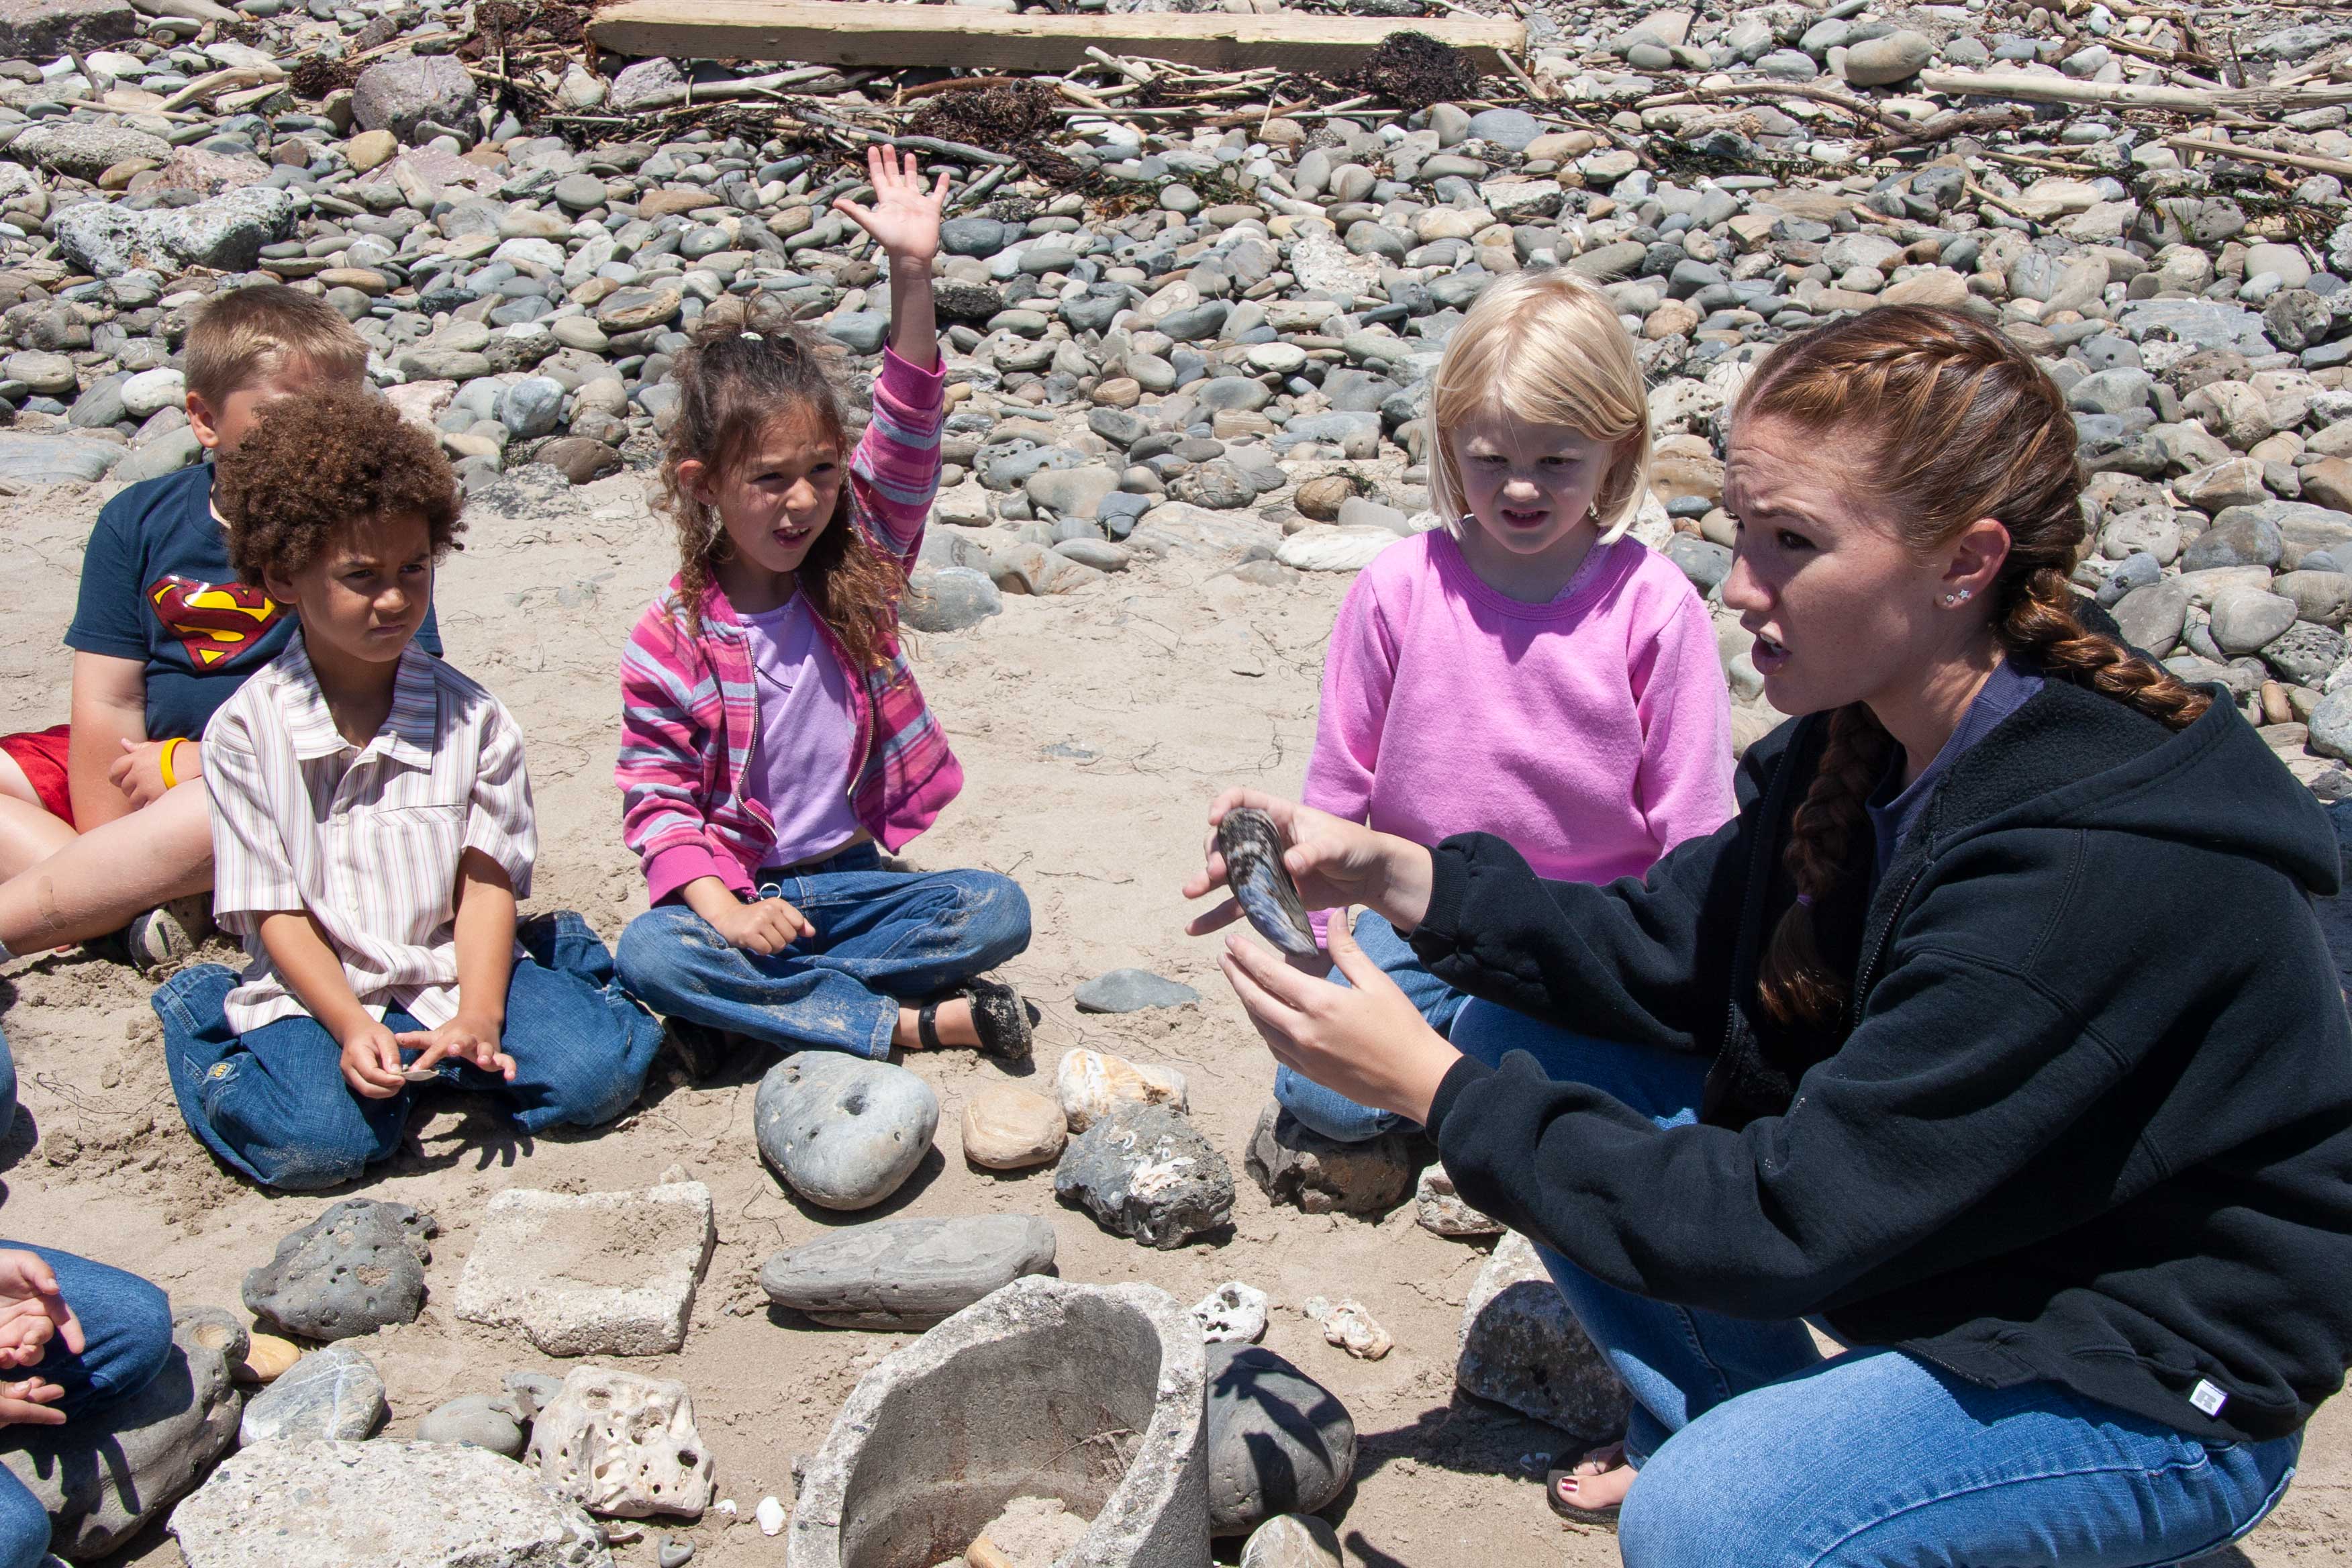 UCSB student shows shells to school kids outdoor